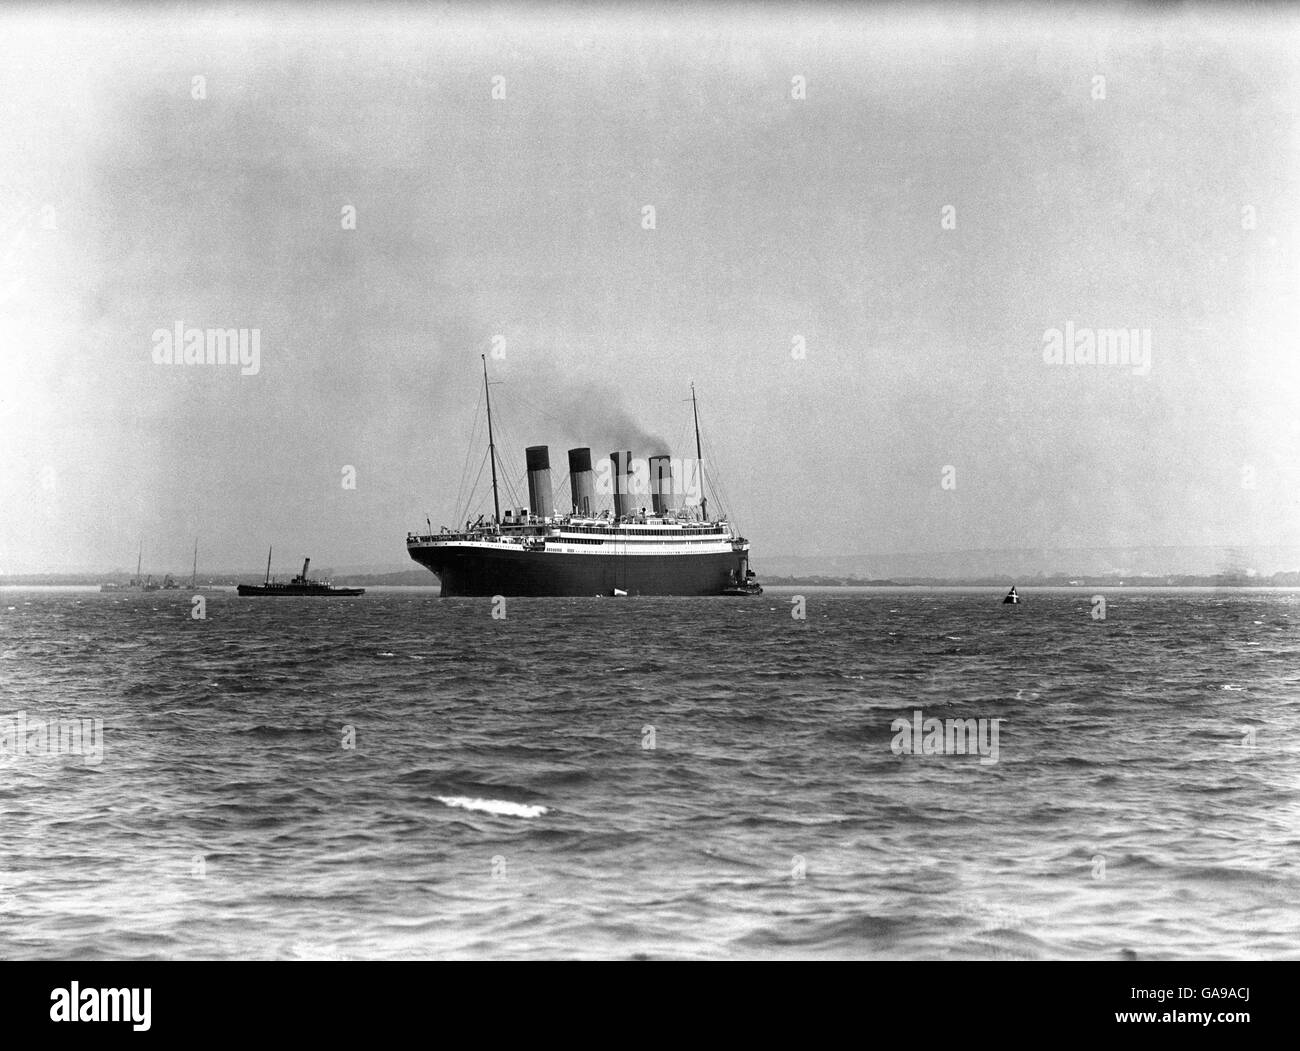 AFTERMATH OF TITANIC DISASTER. RMS Titanic's sister ship RMS Olympic off Spithead after the Titanic sank Stock Photo